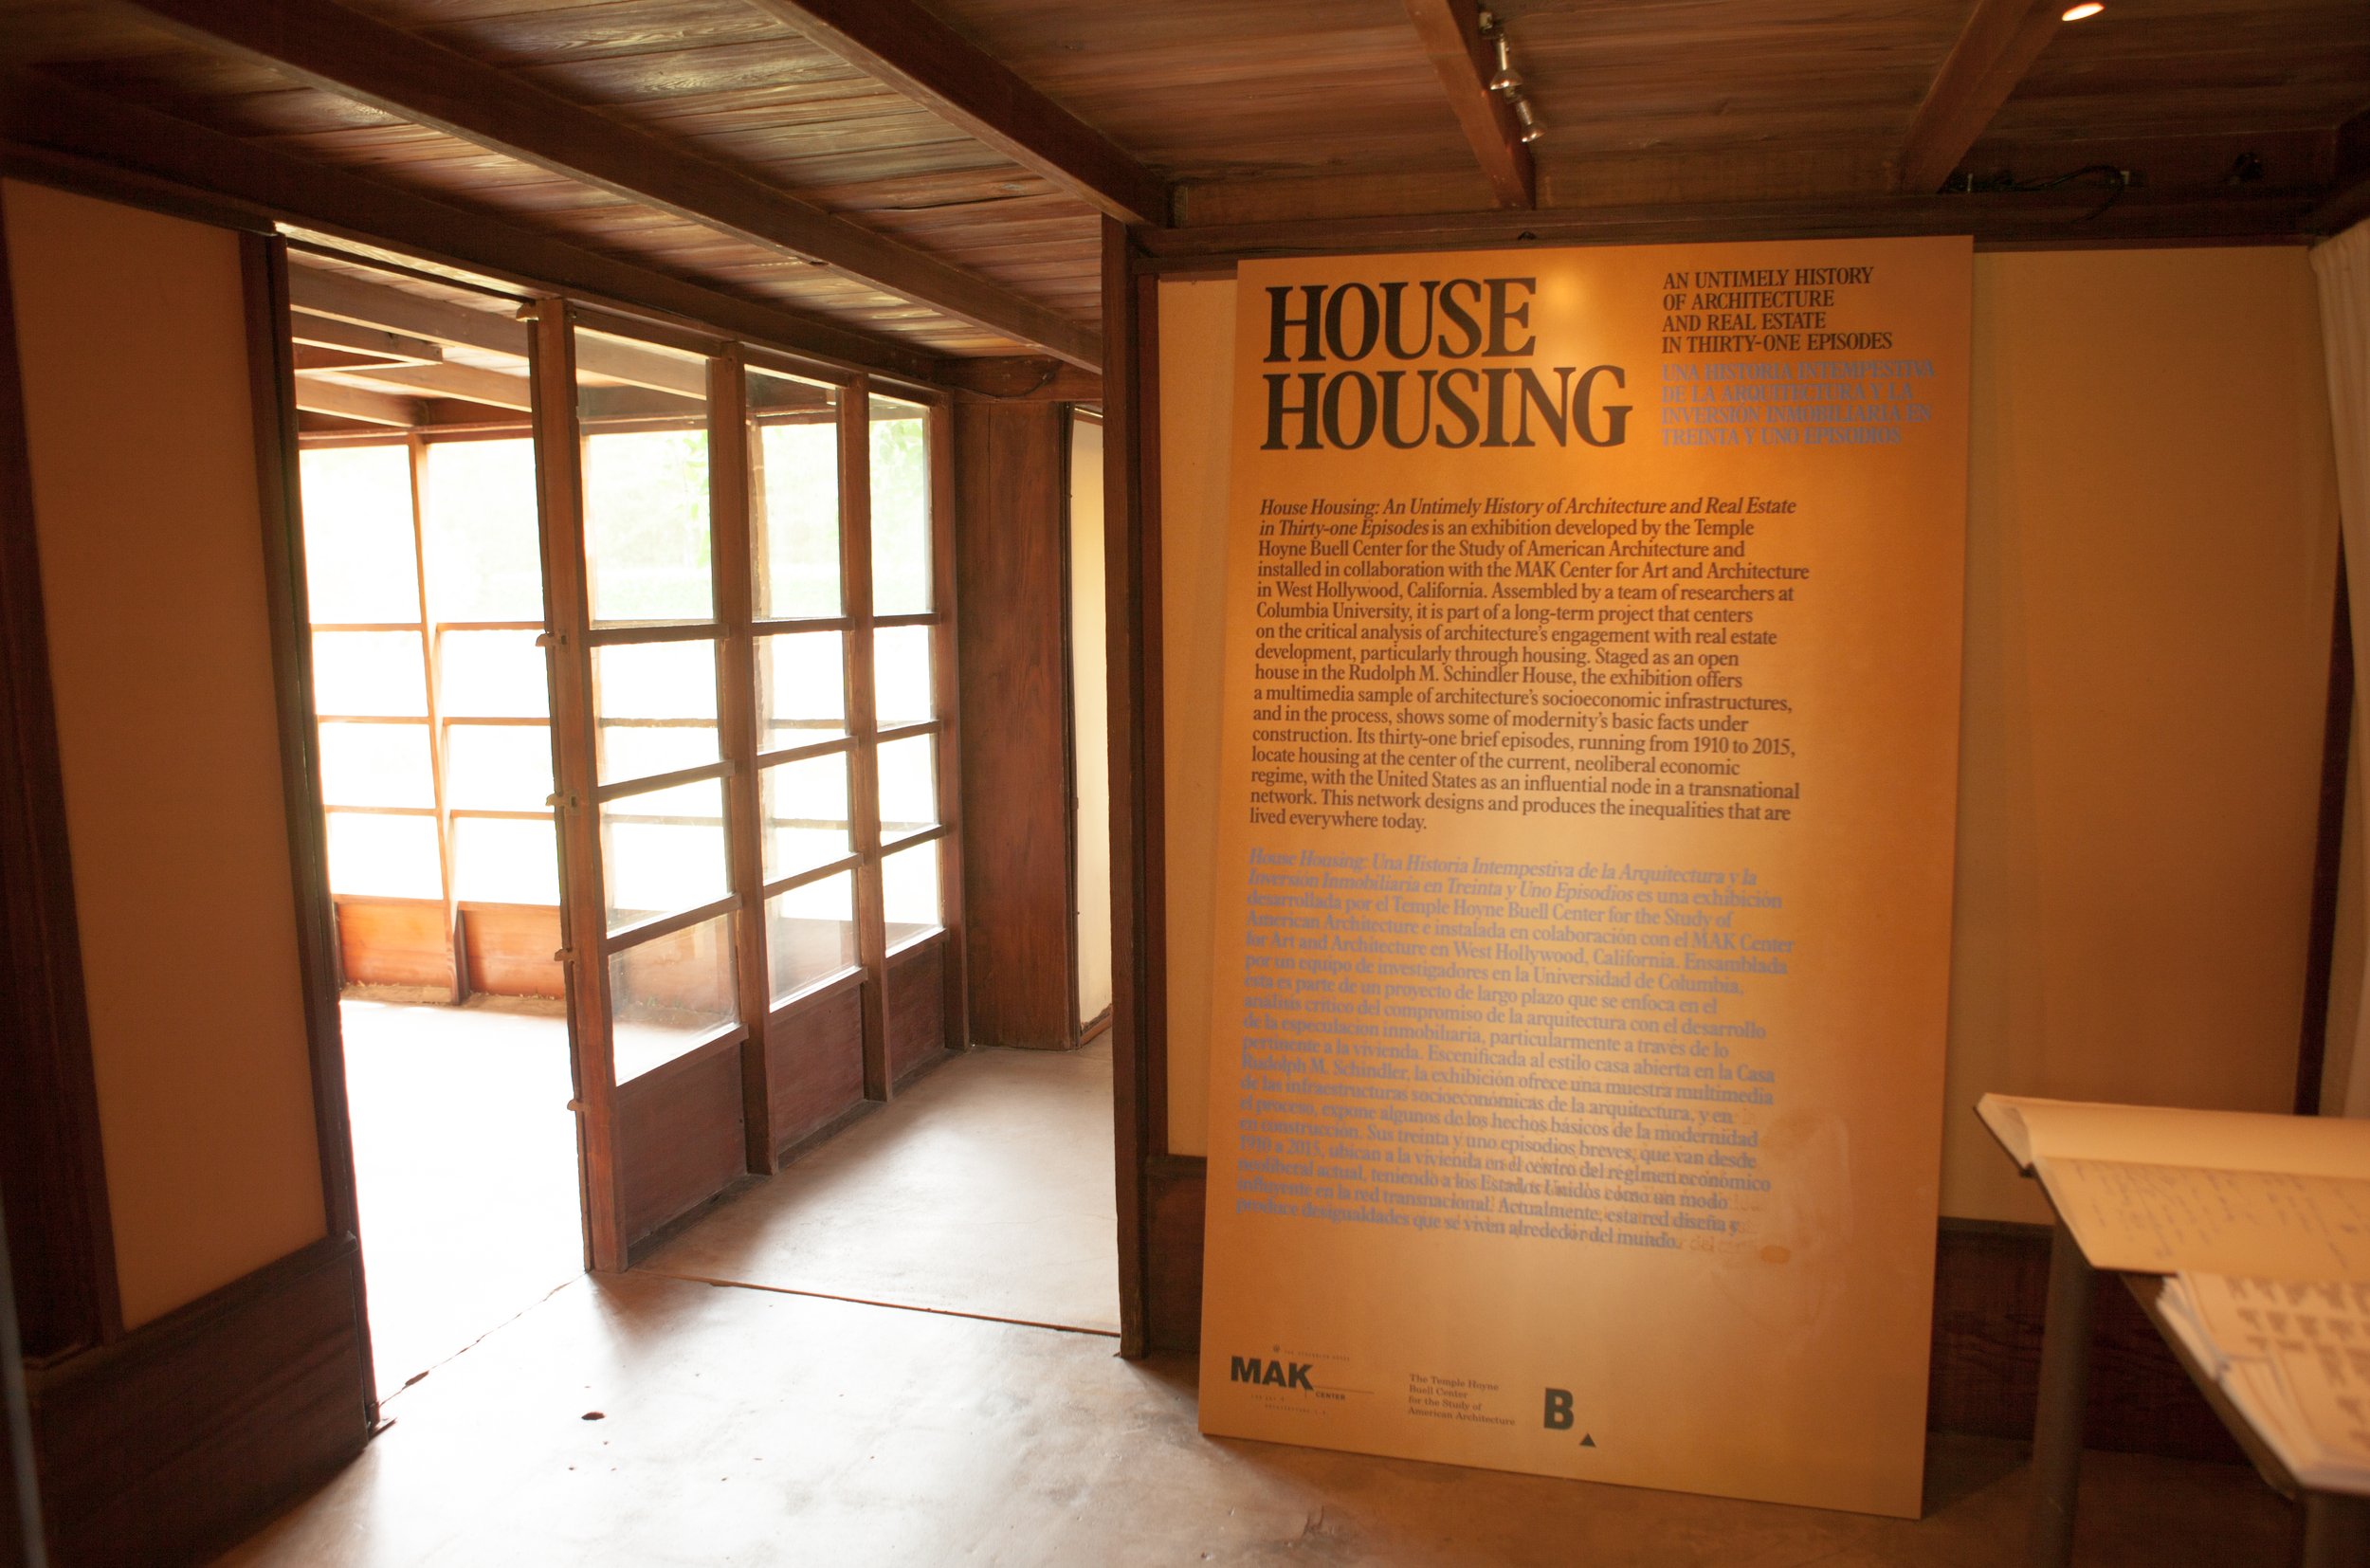 Exhibition: House Housing: An Untimely History of Architecture